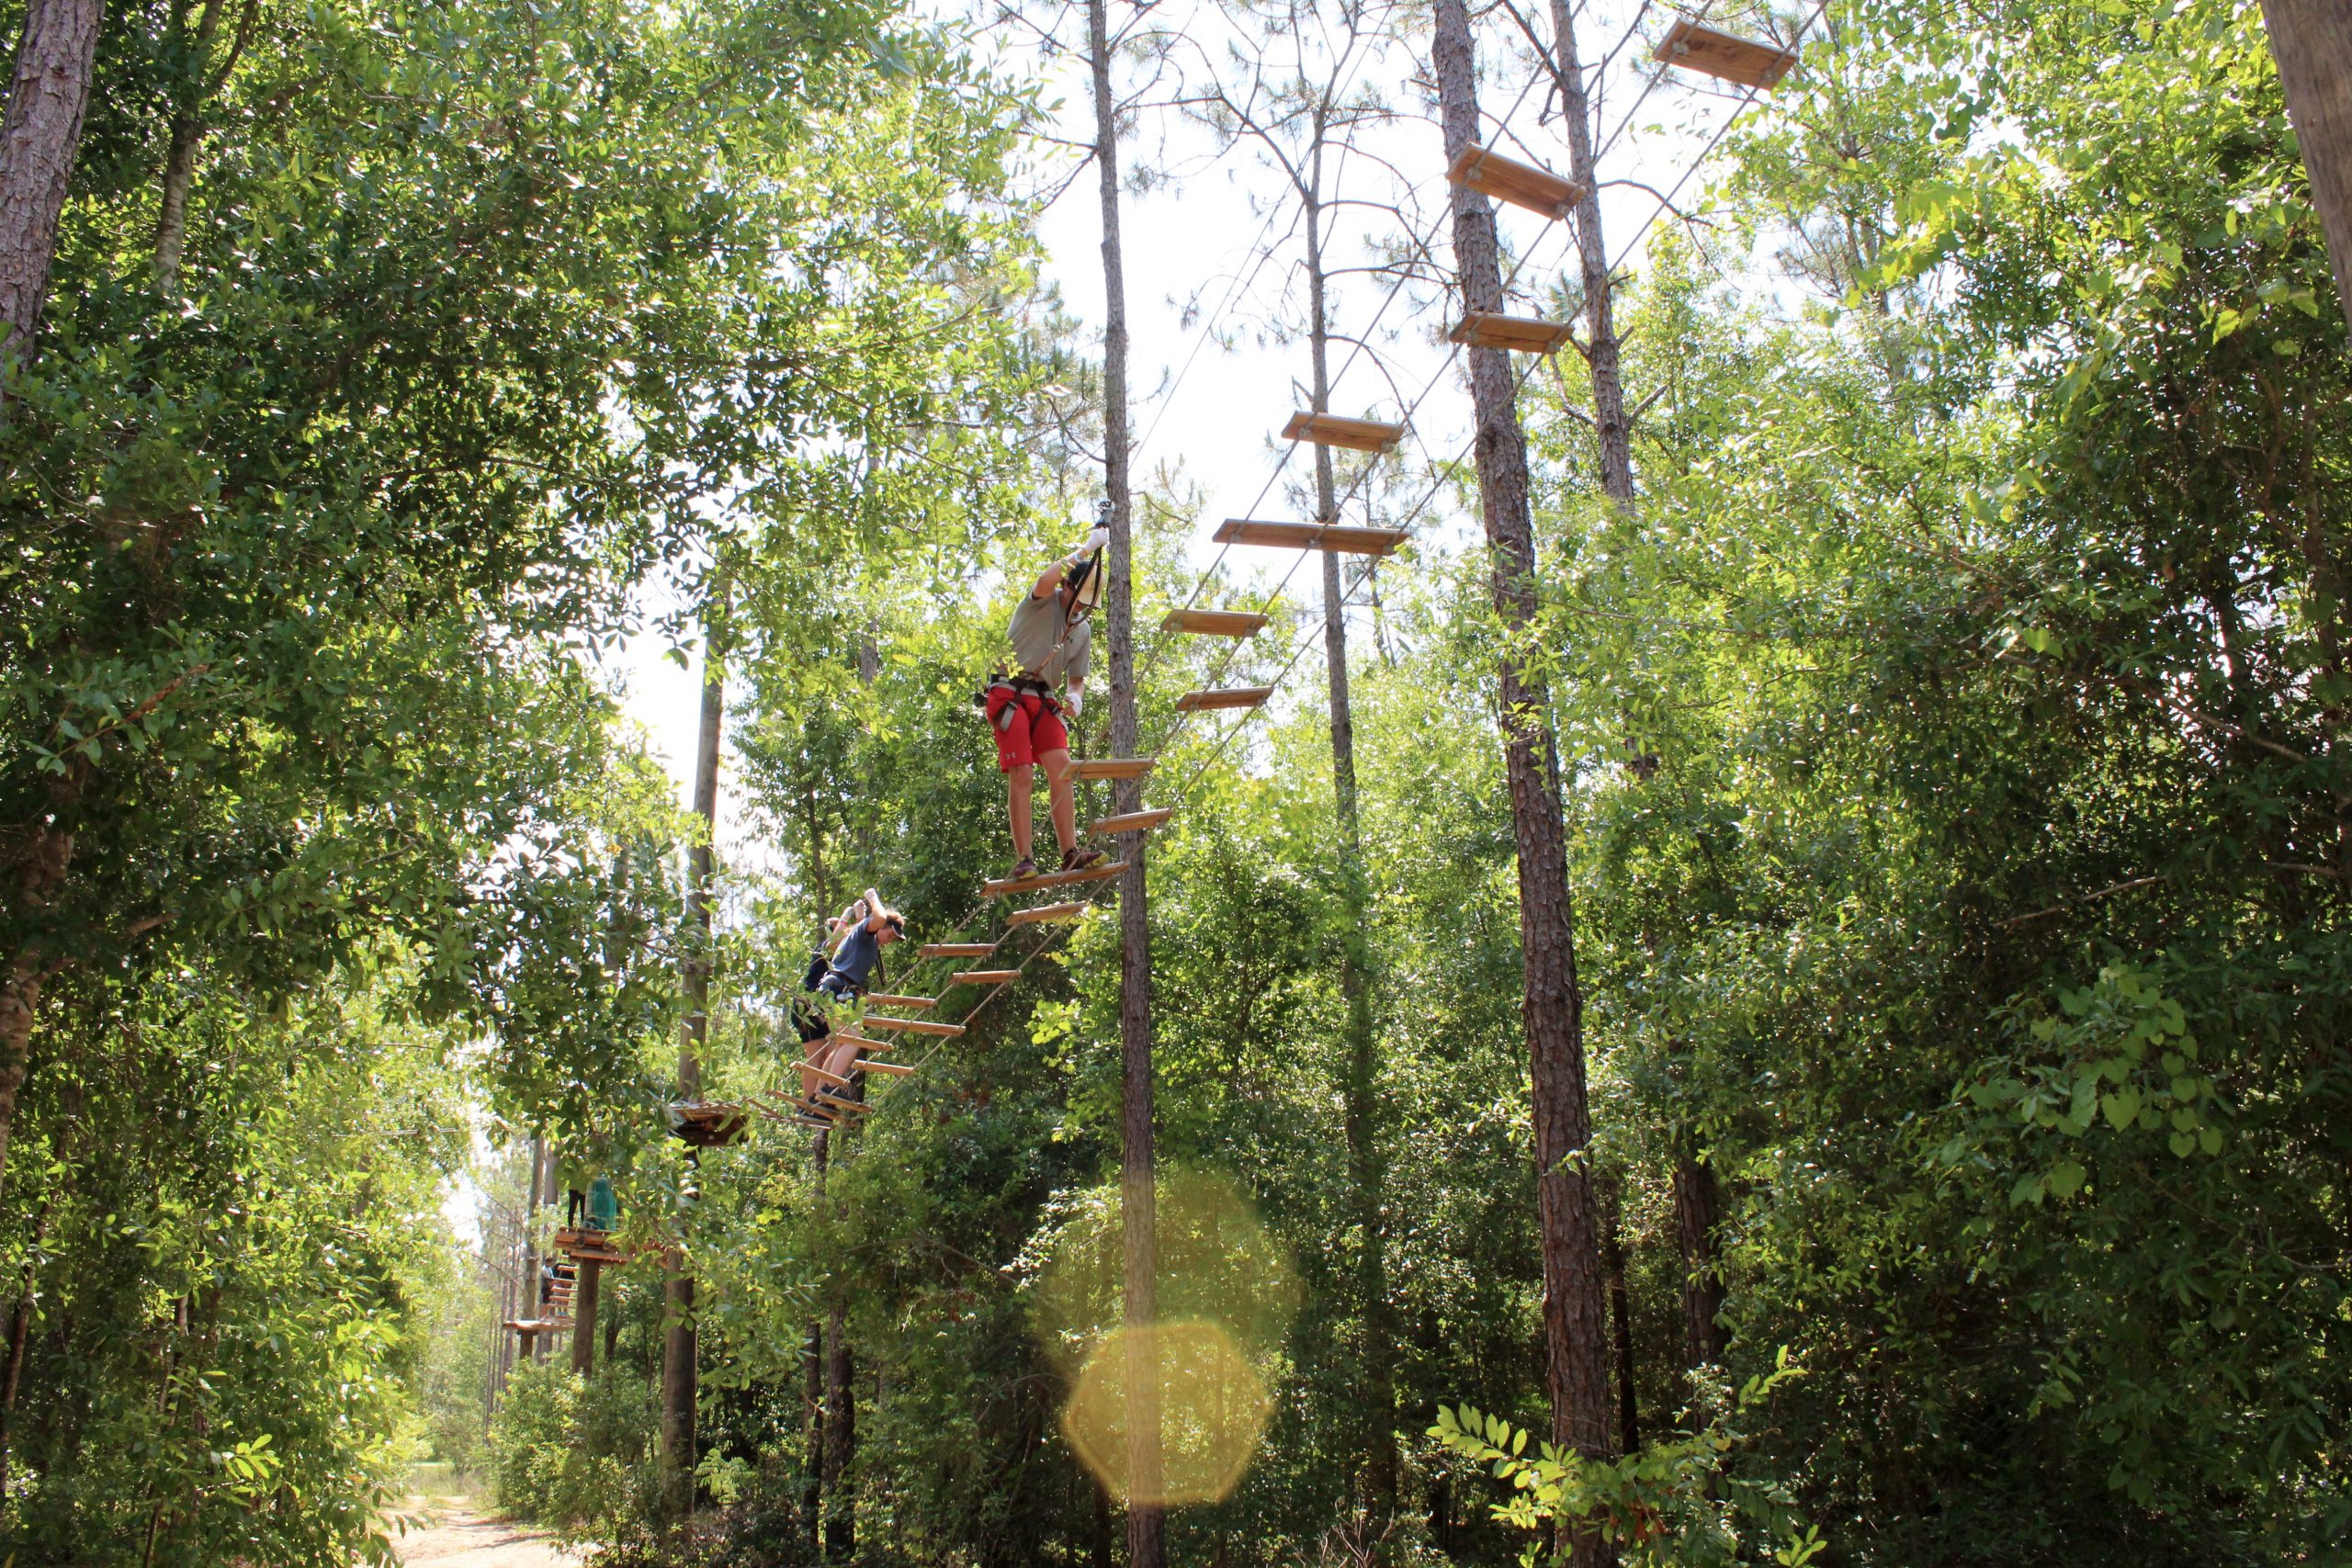 Guests climbing a ropes course on a sunny day